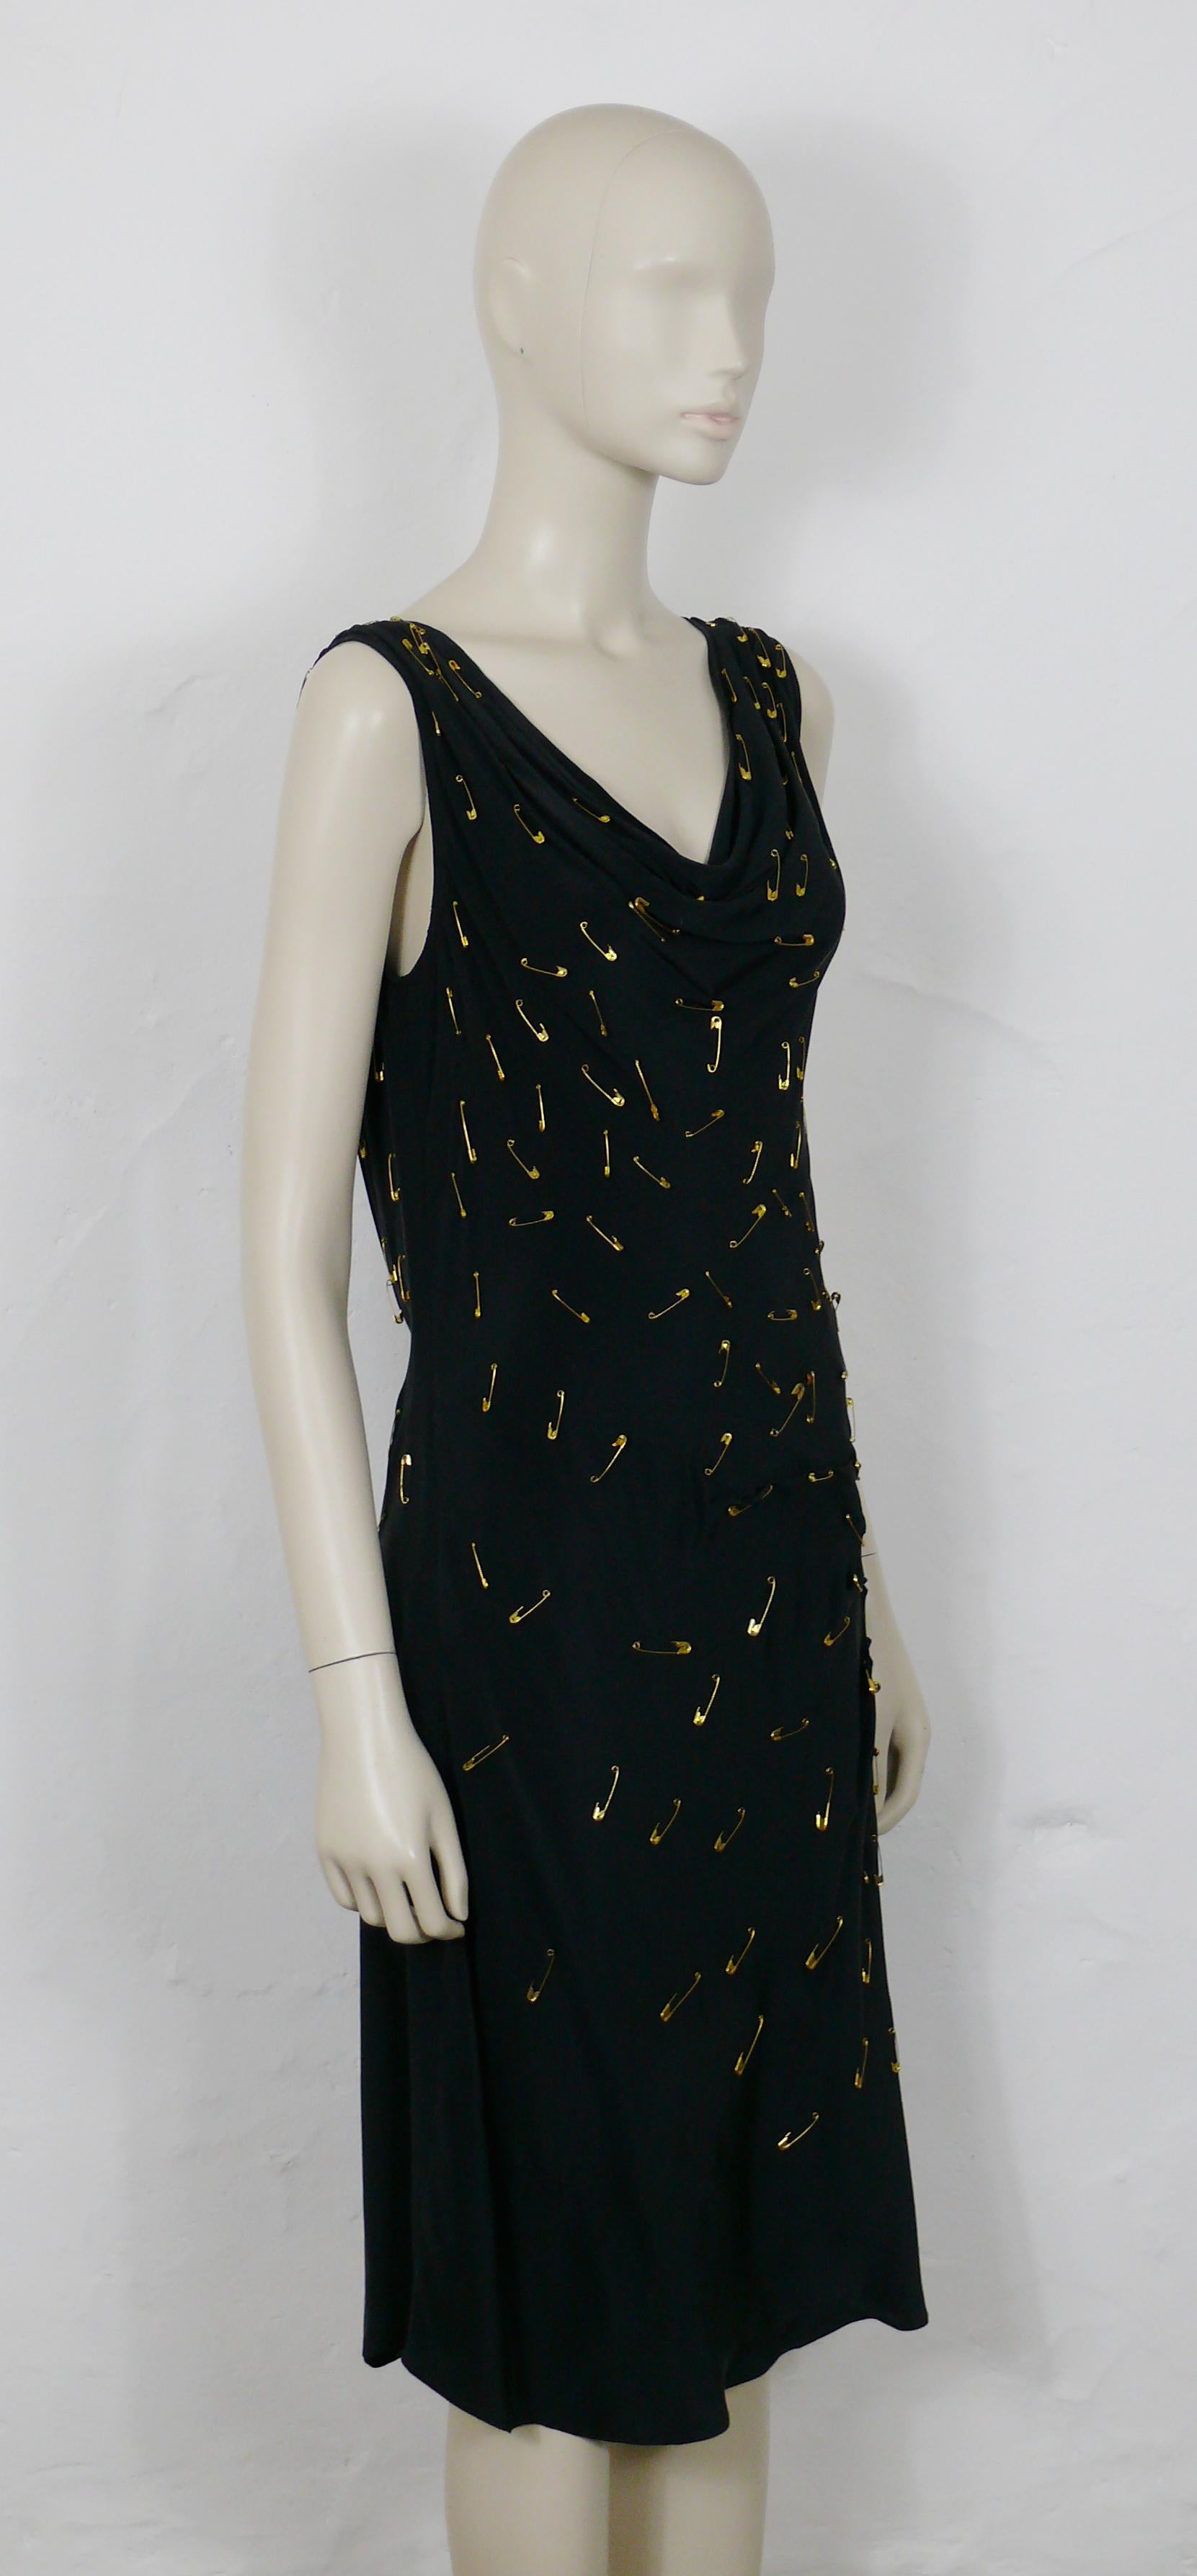 MOSCHINO iconic safety pin embellished black dress as worn by KATE MOSS.

Side hidden zipper closure.

Label reads MOSCHINO CHEAP AND CHIC.

Size tag reads : I 48 / D 44 / F 44 / GB 16 / USA 14.
Please refer to measurements.

Composition tag reads :